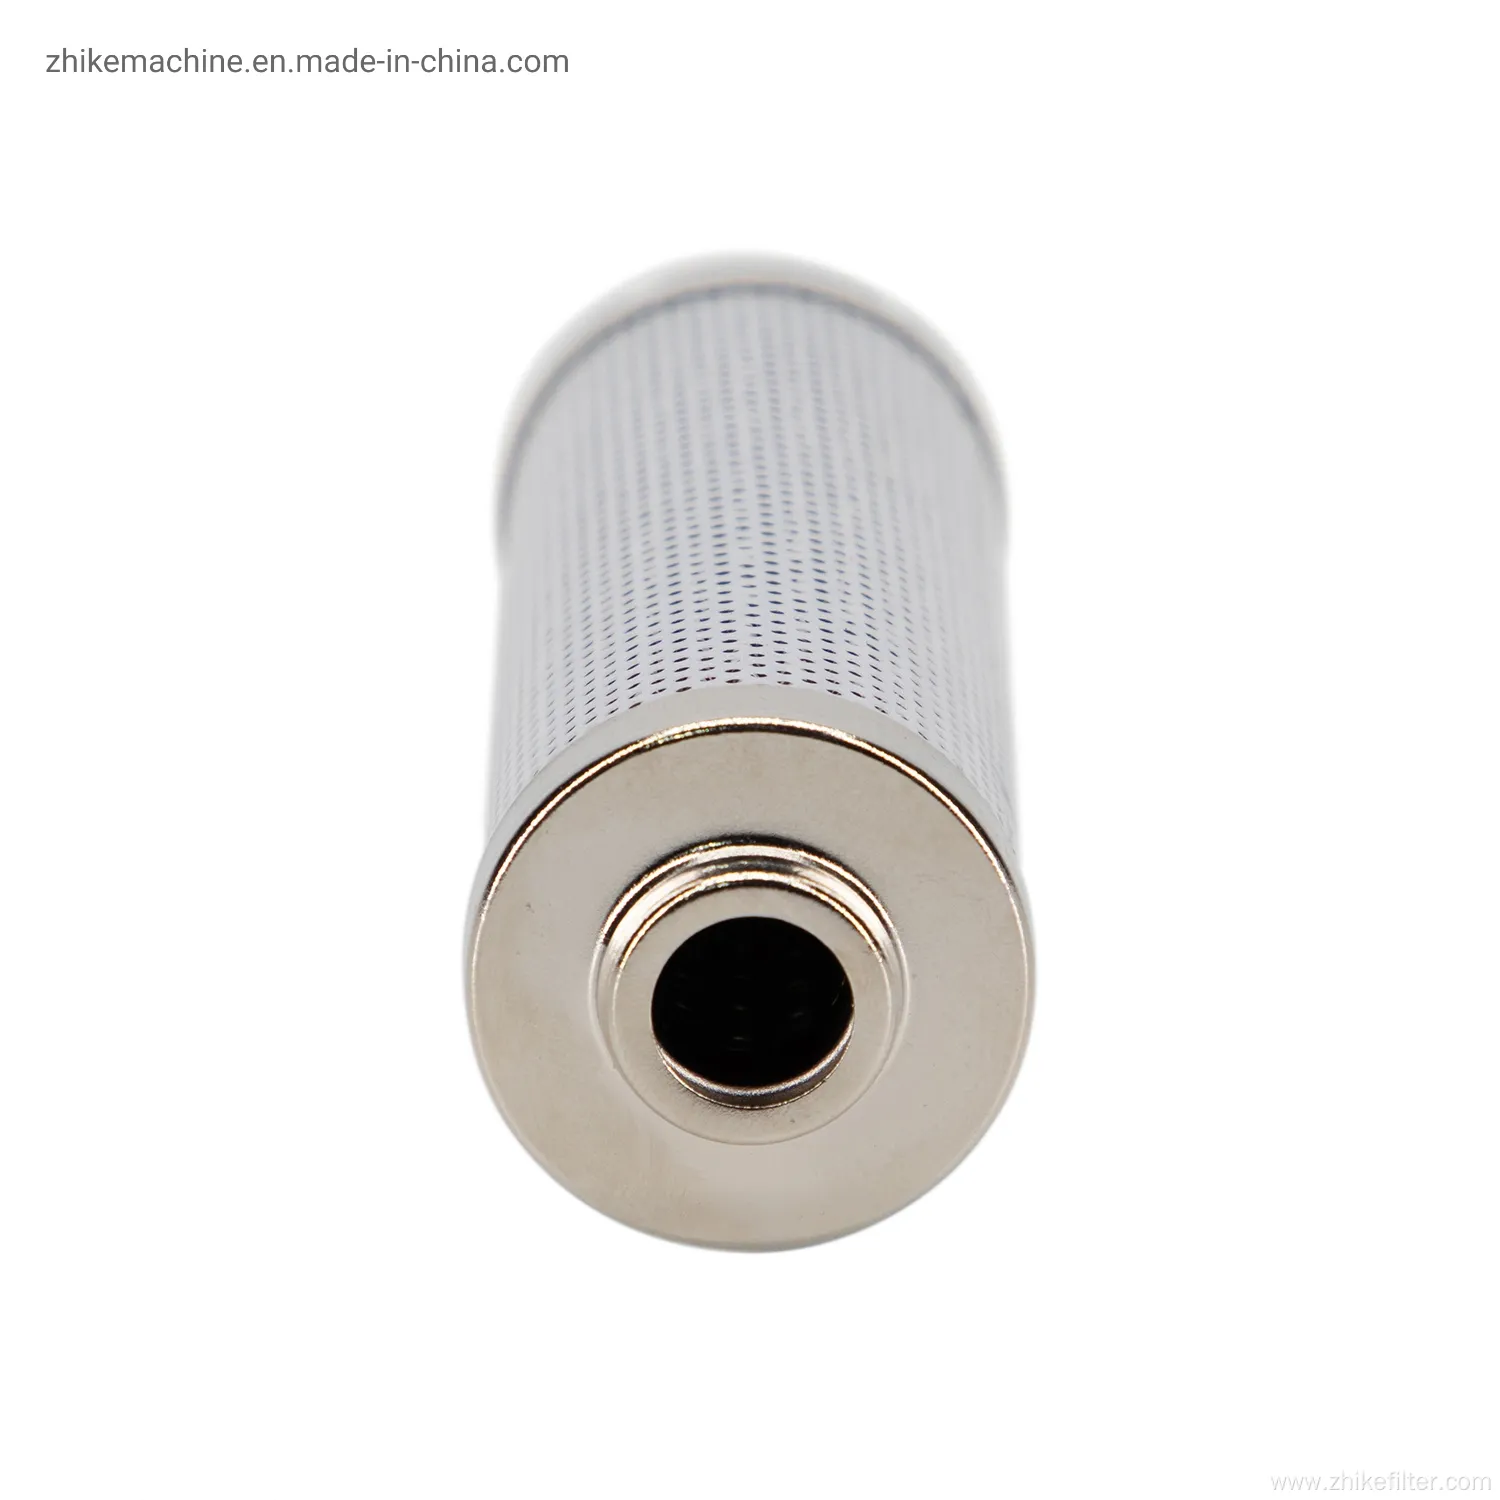 Famous Brand High Pressure Oil Filter Element